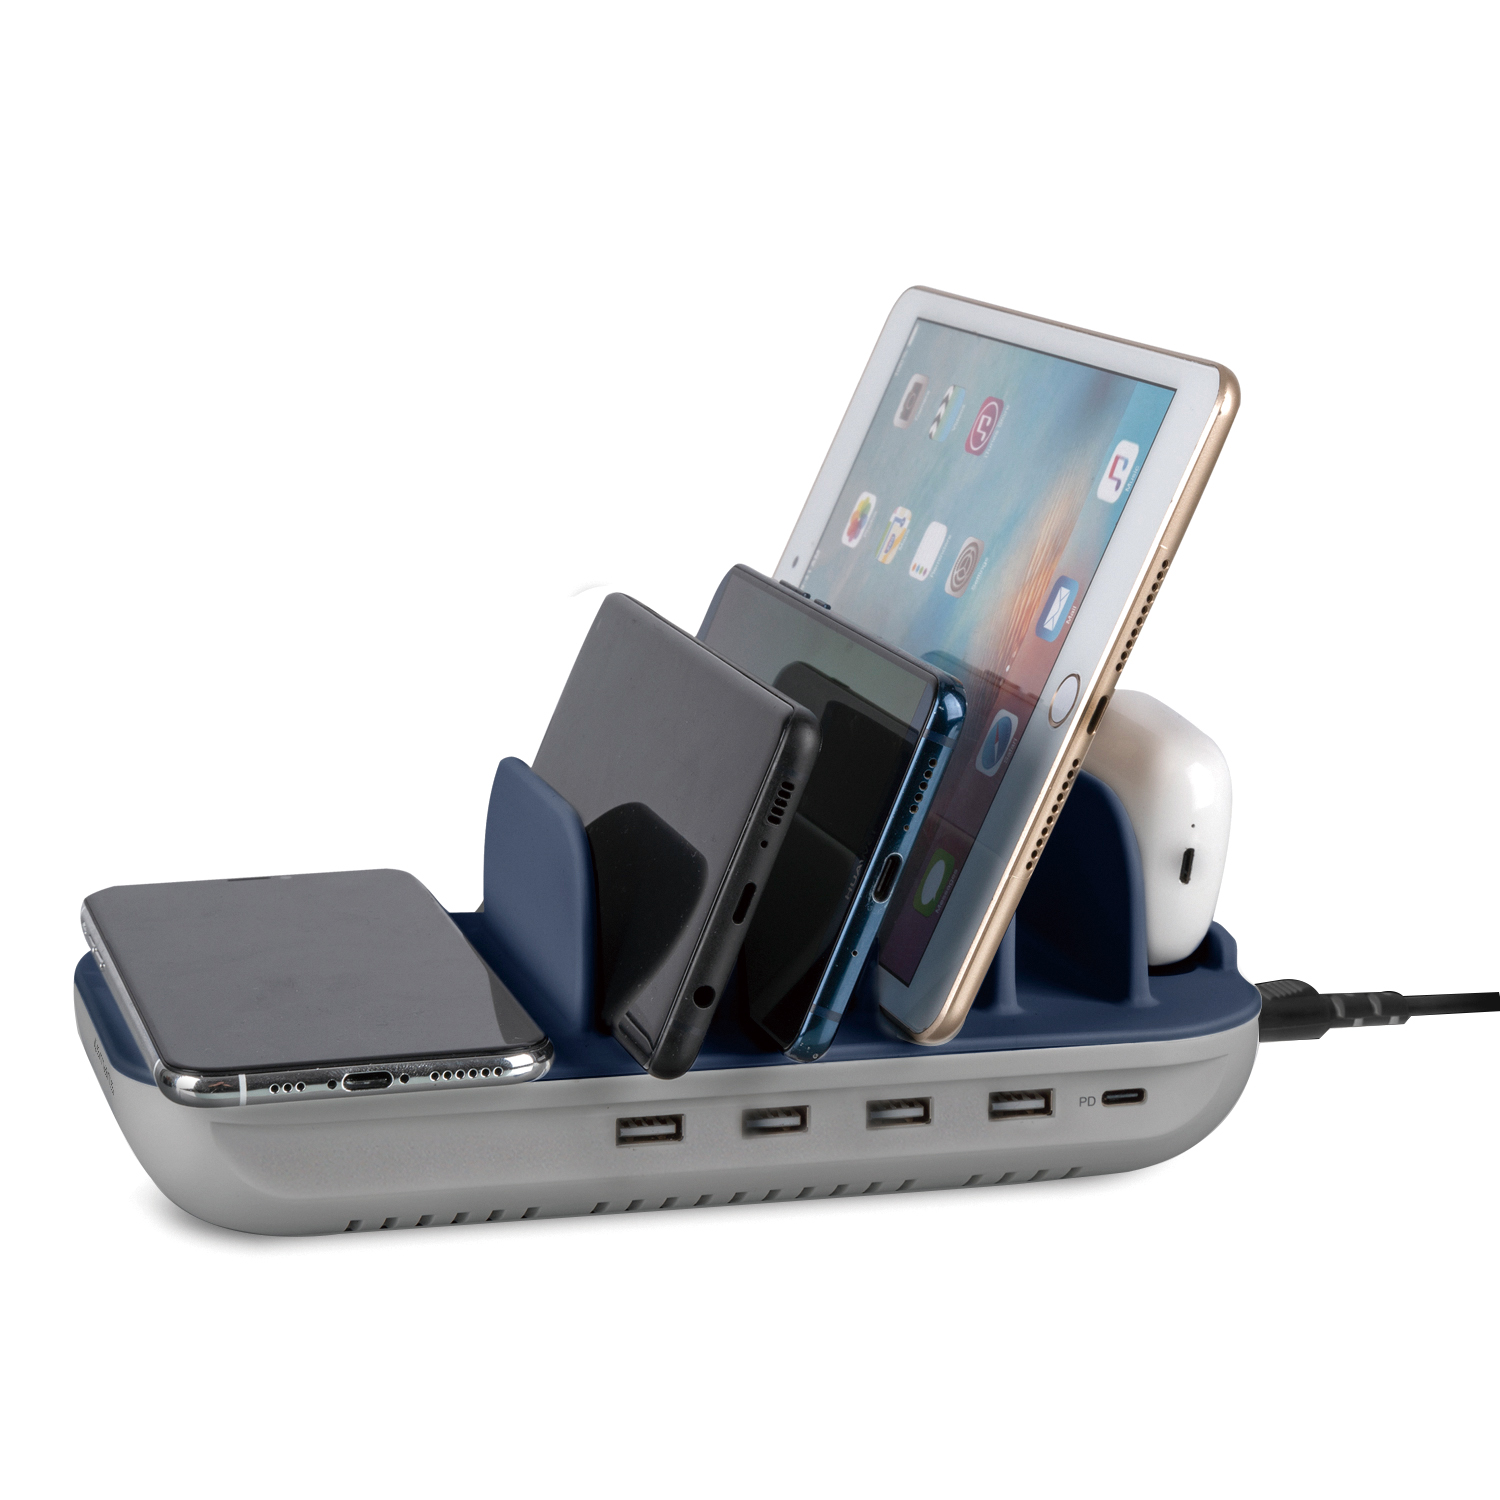 The 4smarts charging station can quickly charge up to 6 devices at once.